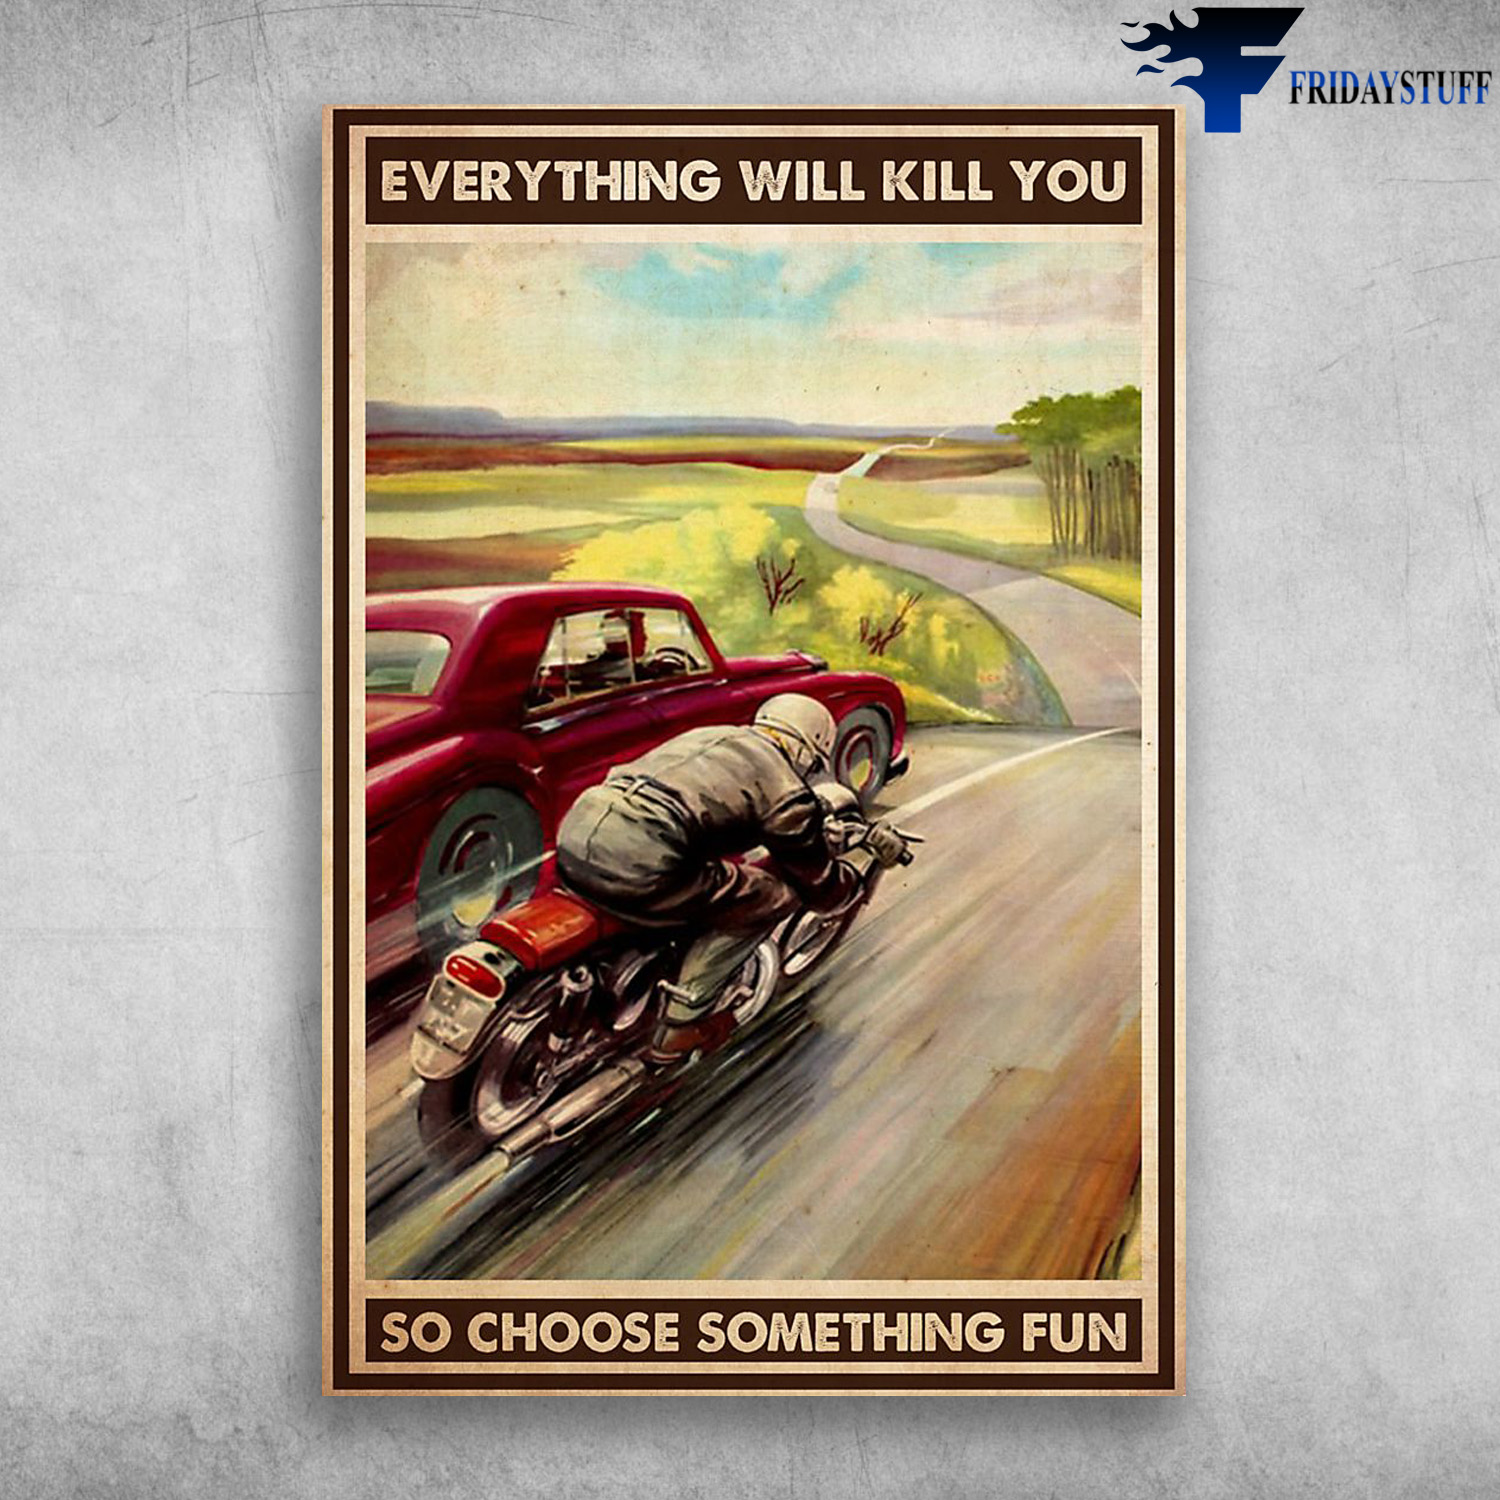 Motocycle Racing With Car - Everything Will Kill You, So Choose Something Fun